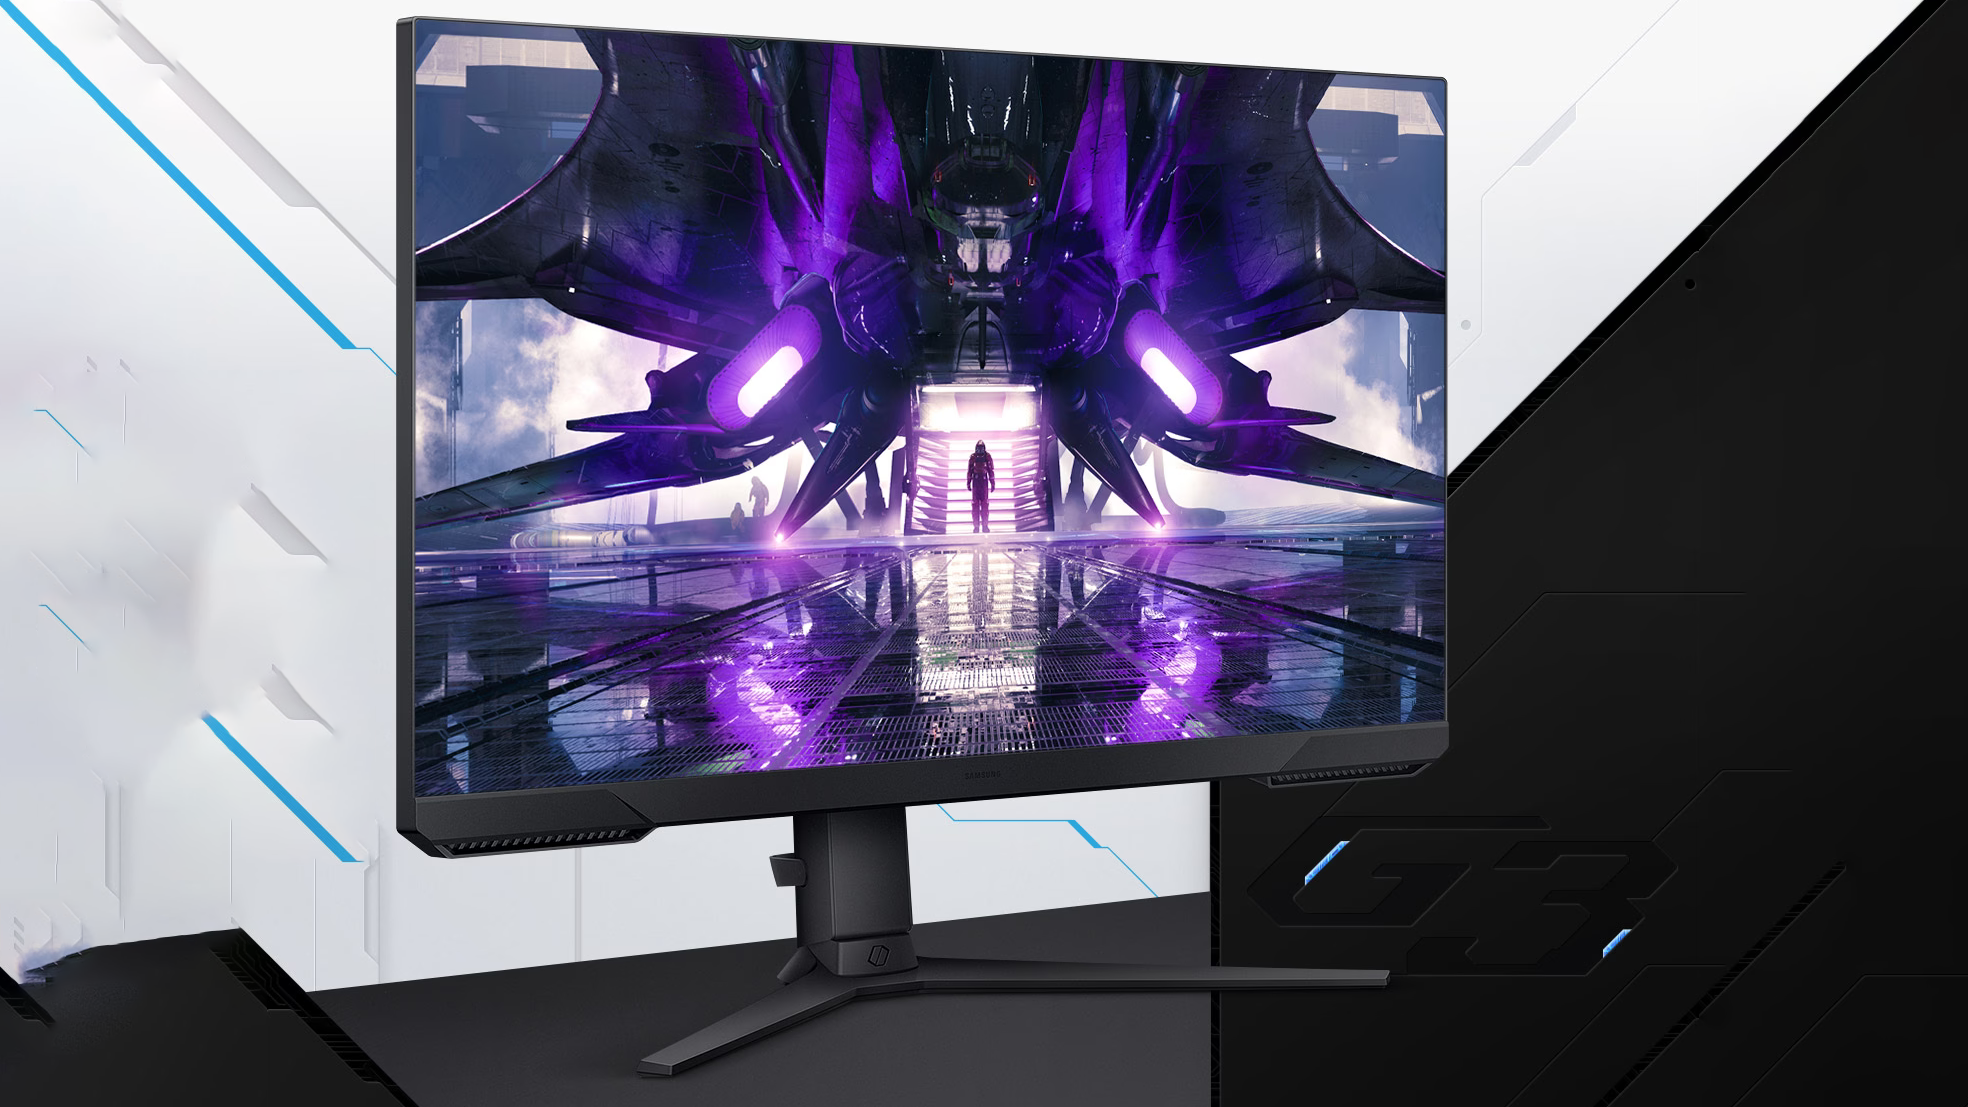 This £150 Samsung gaming monitor is crazy-good for the money